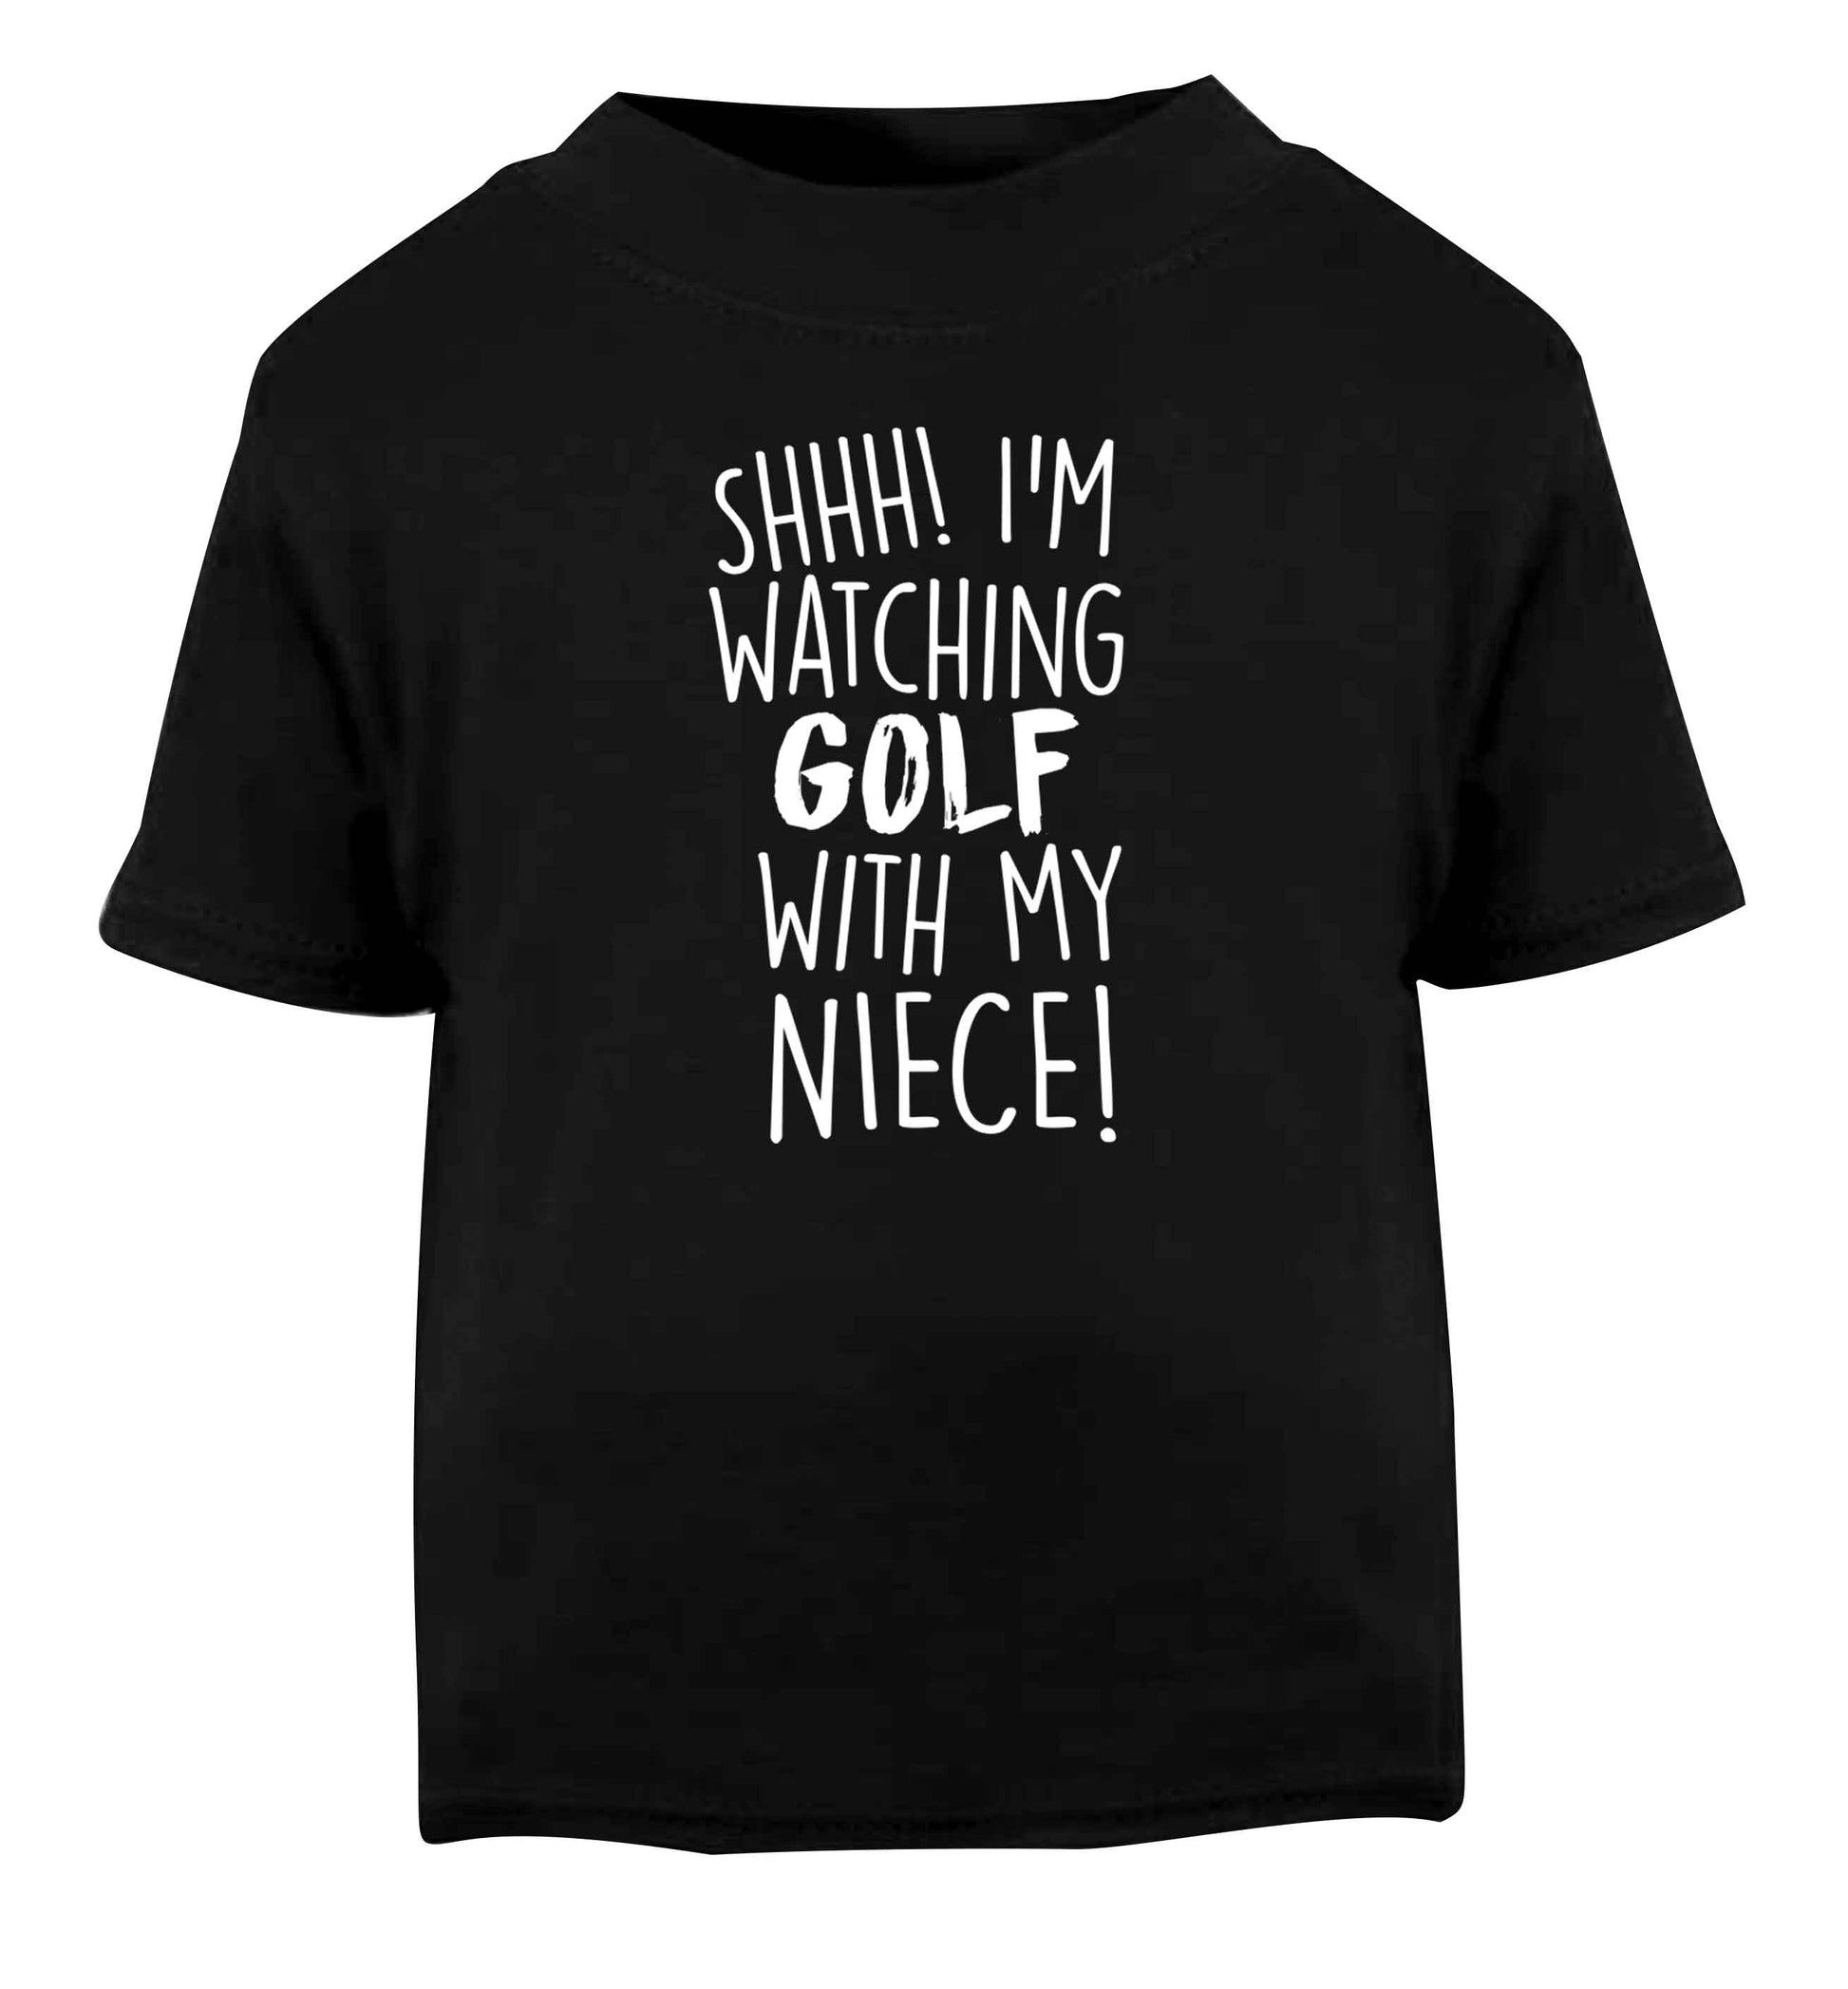 Shh I'm watching golf with my niece Black Baby Toddler Tshirt 2 years